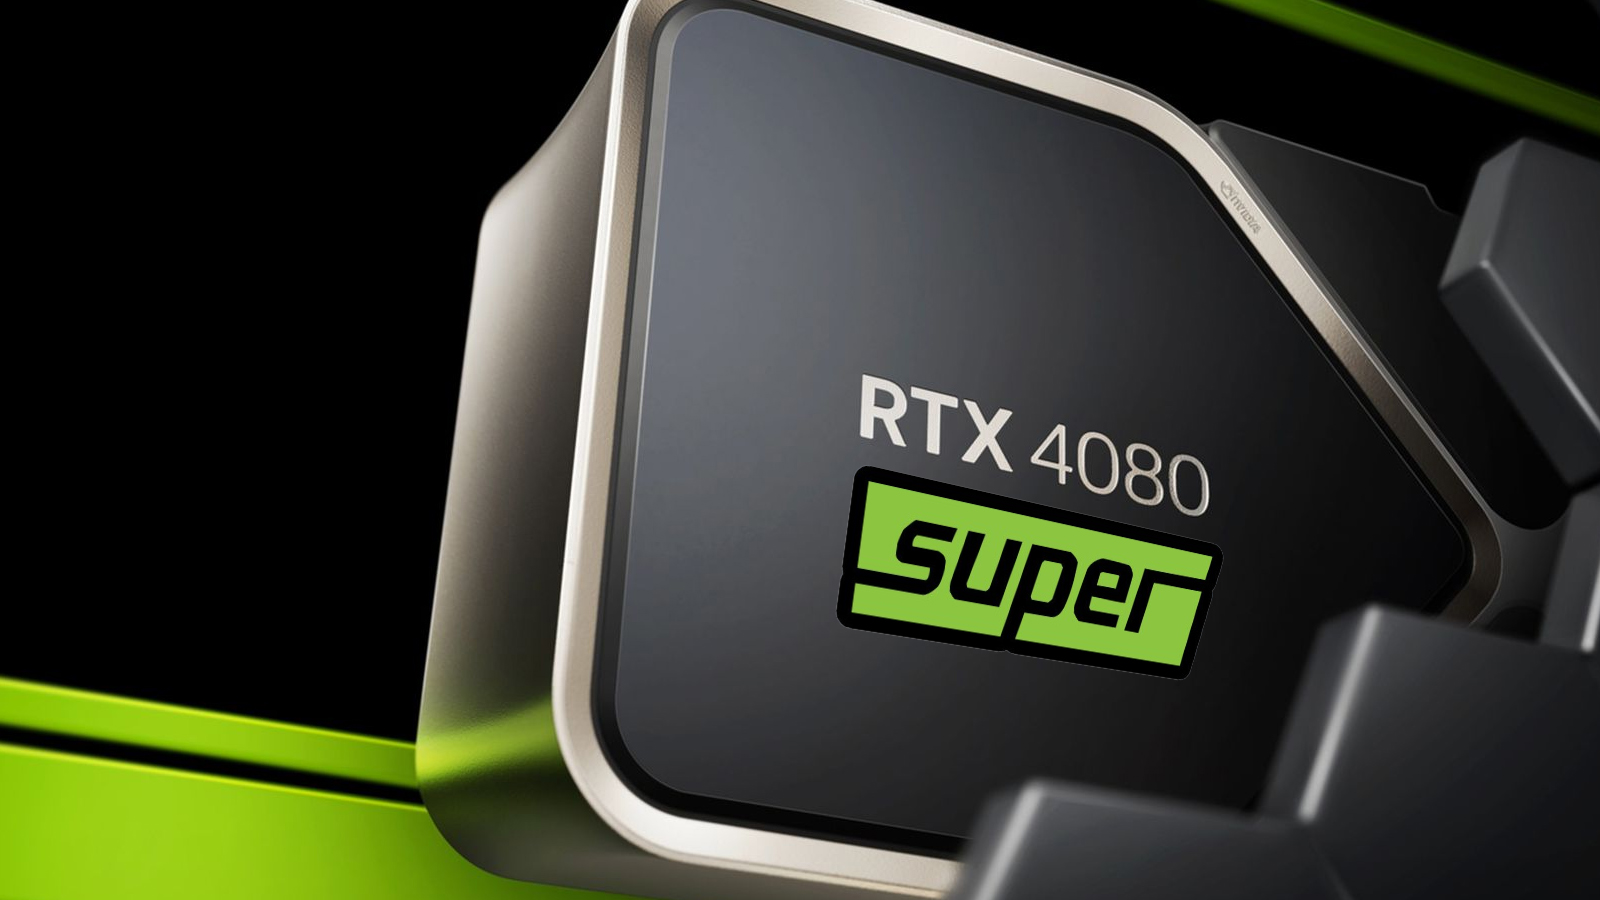 Where to buy the Nvidia RTX 4080 Super: Price, release date